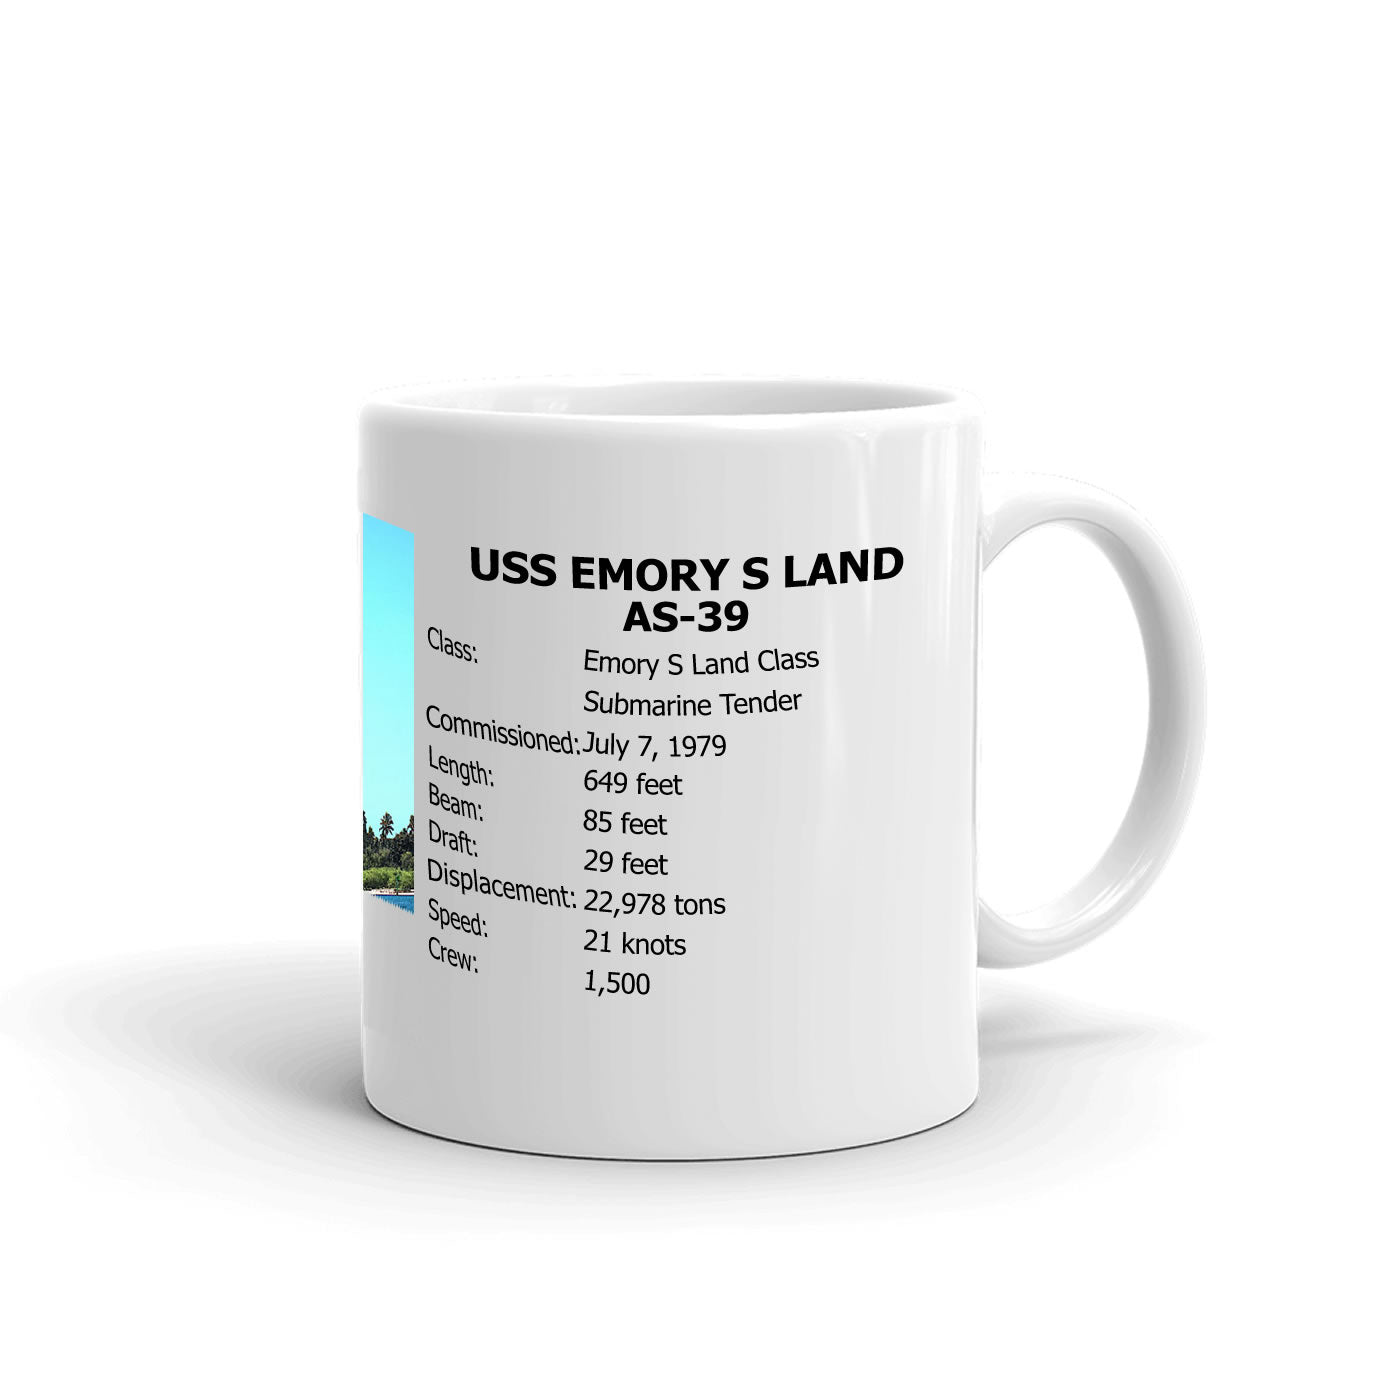 USS Emory S Land AS-39 Coffee Cup Mug Right Handle